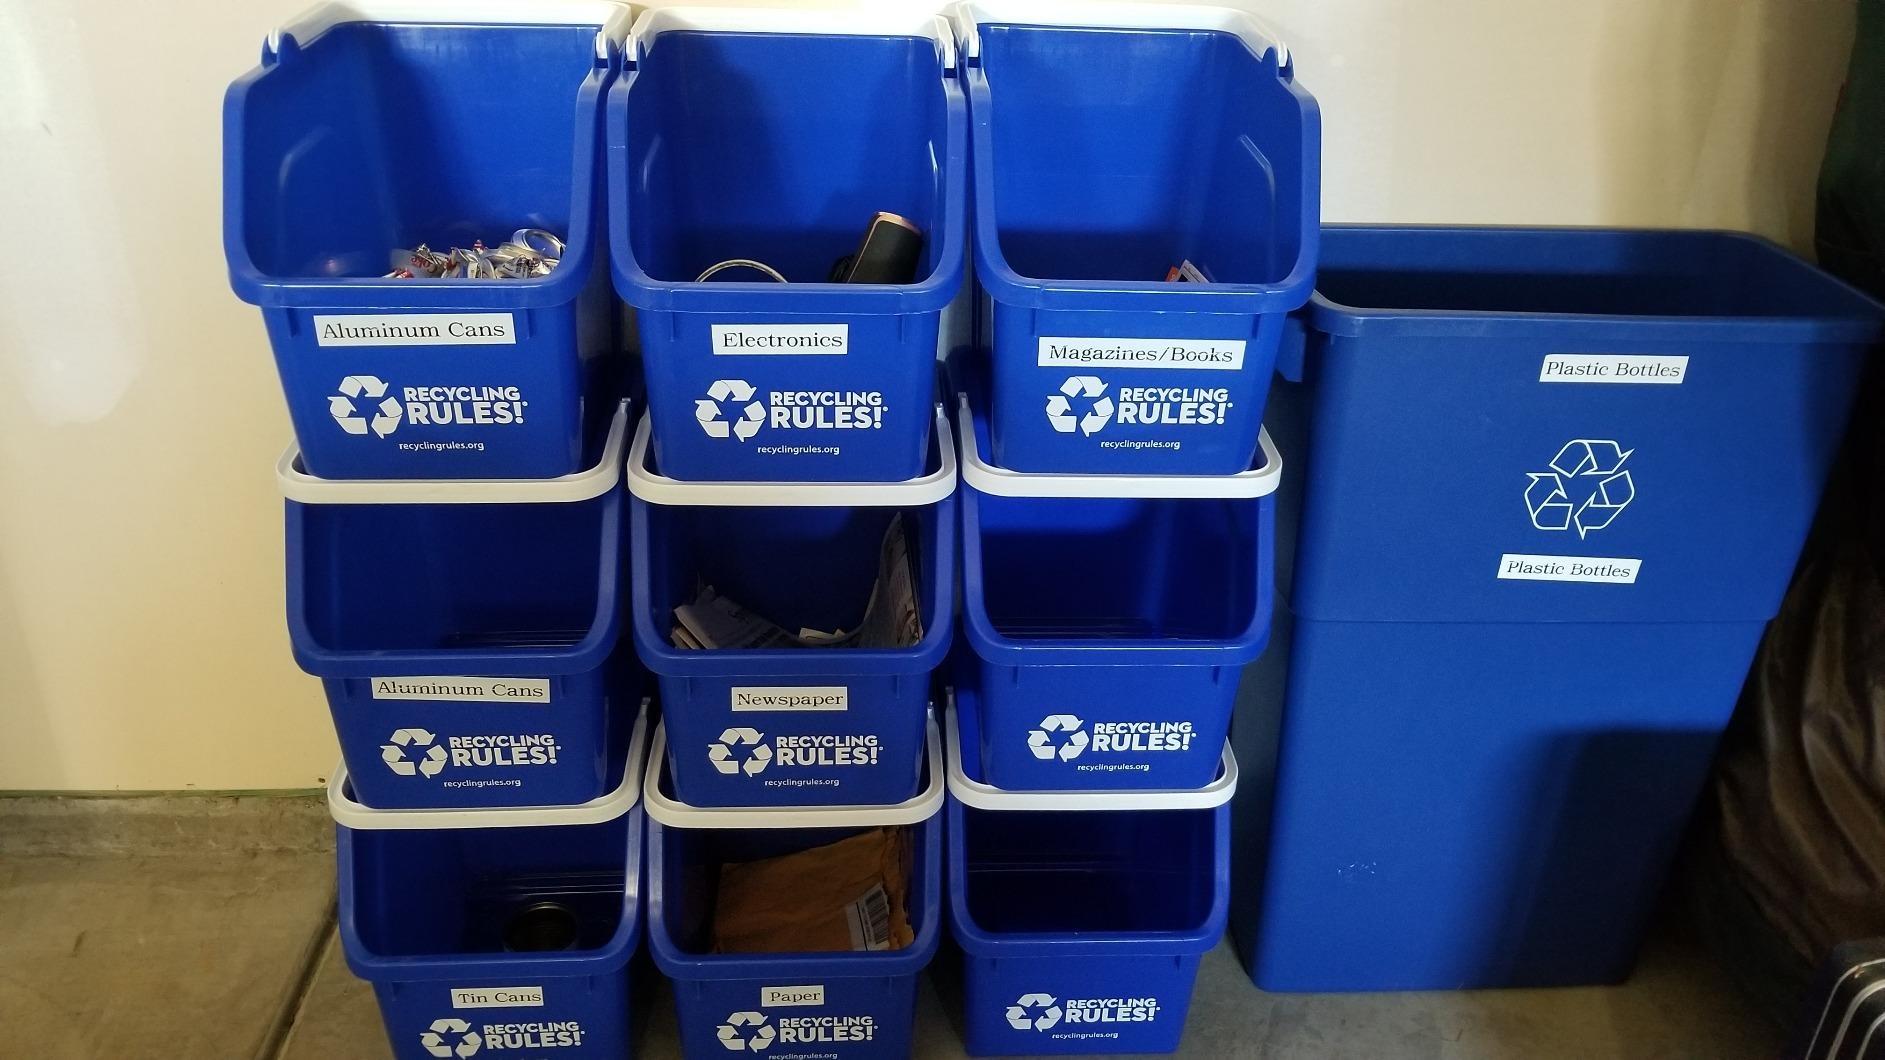 Recycling bins labeled for aluminum cans, electronics, and paper alongside a large plastic recycling bin